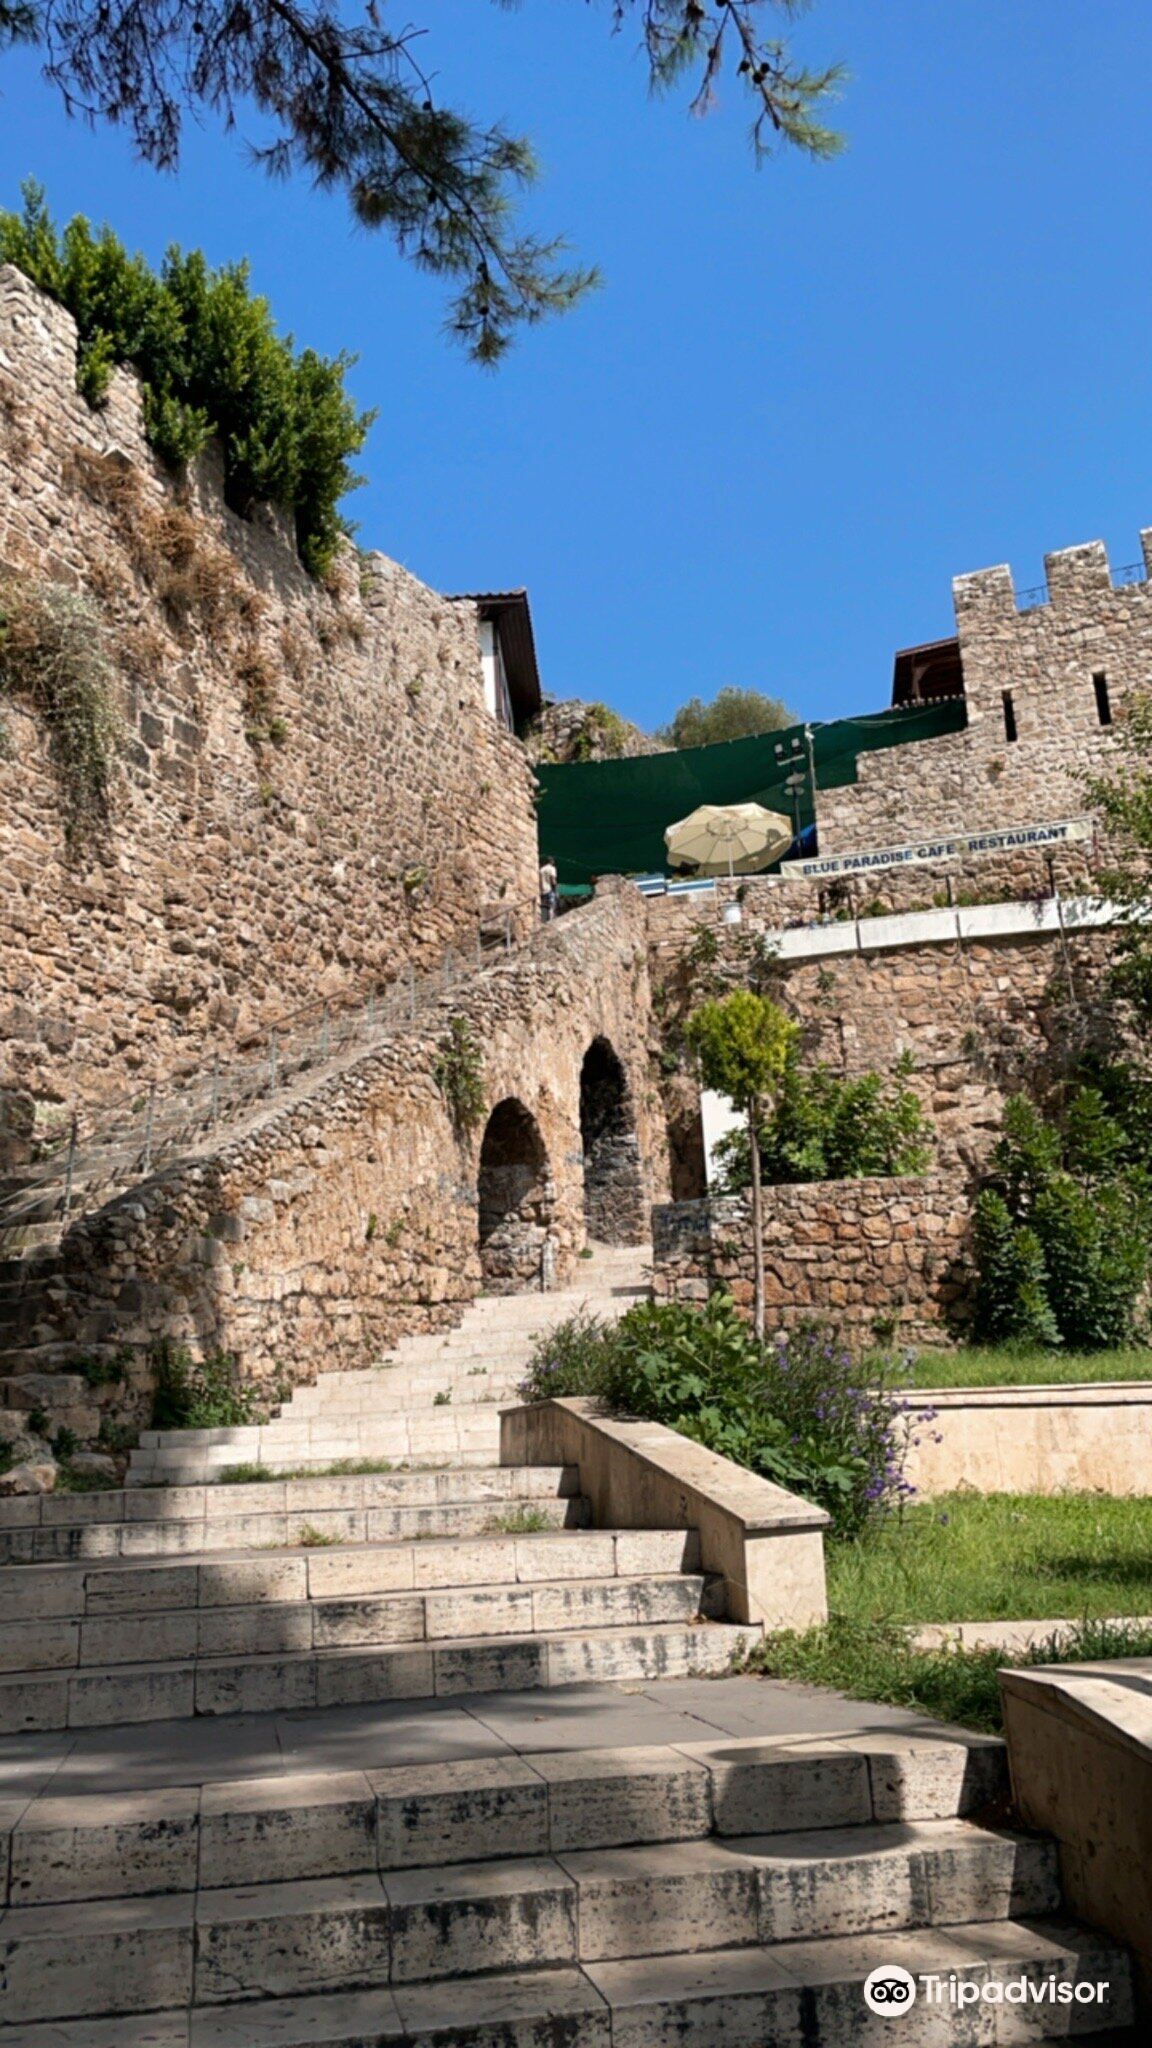 kesik minare camii travel guidebook must visit attractions in antalya kesik minare camii nearby recommendation trip com